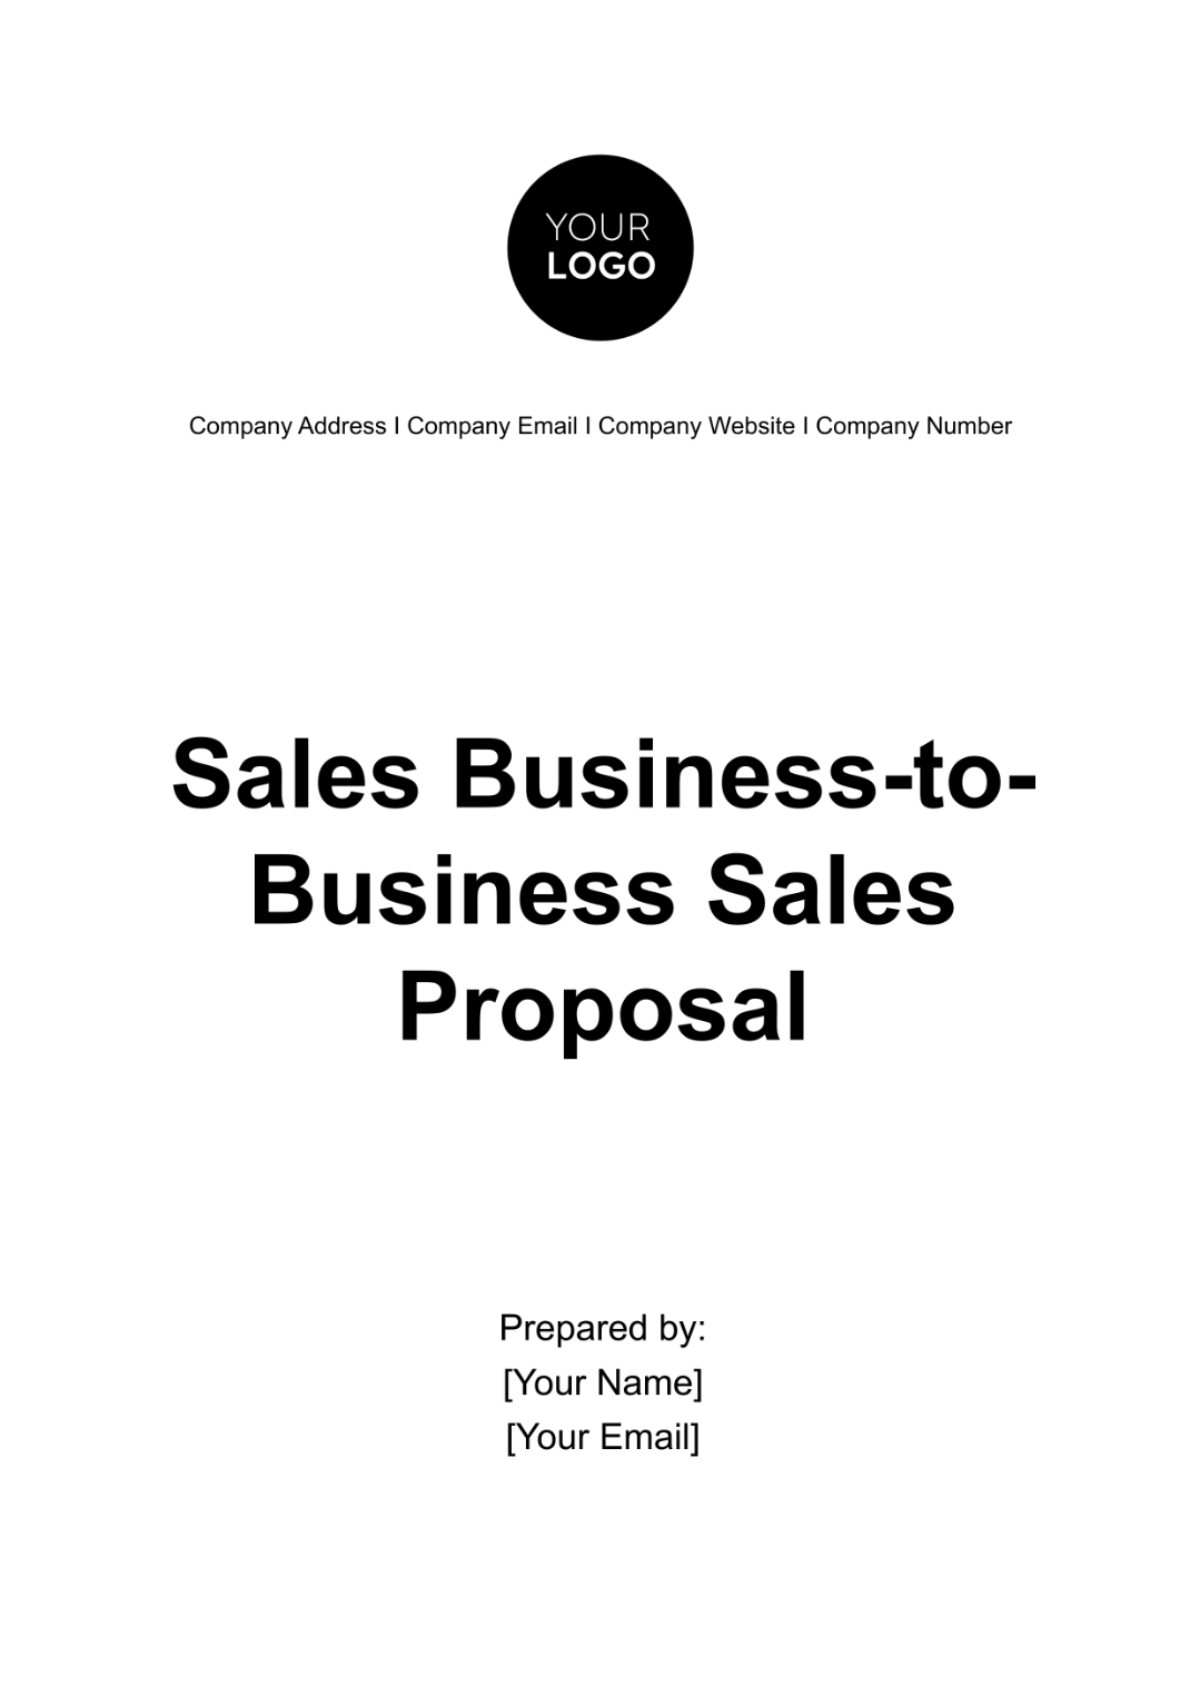 Sales Business-to-Business Sales Proposal Template